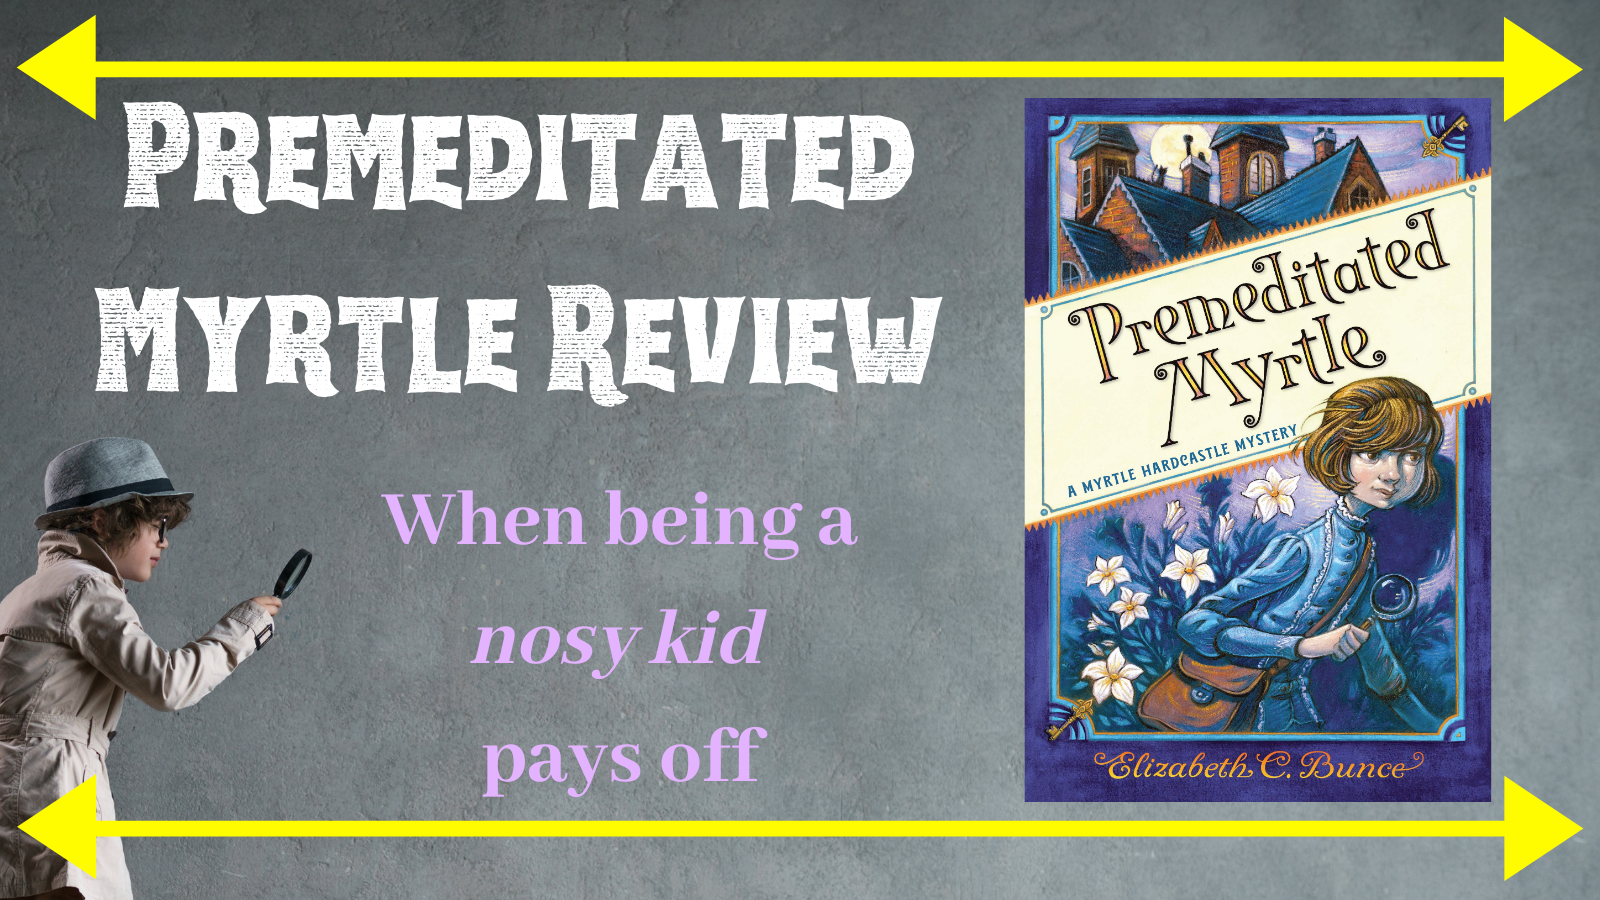 Premeditated Myrtle Review